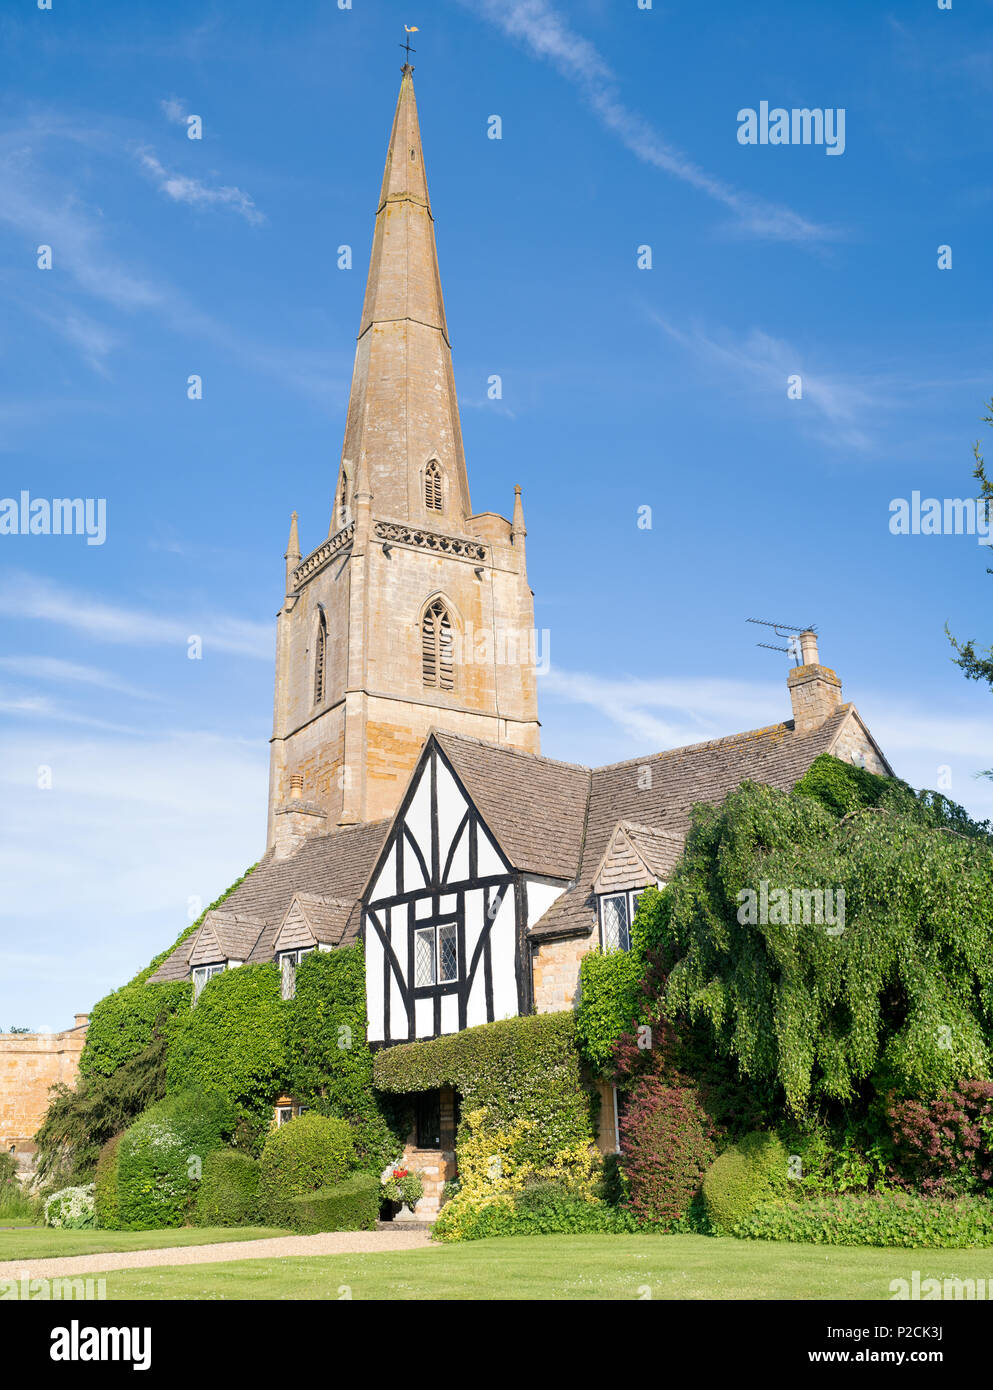 Large house covered by foliage in front of St Gregorys church in the village of Tredington, Warwickshire, England Stock Photo